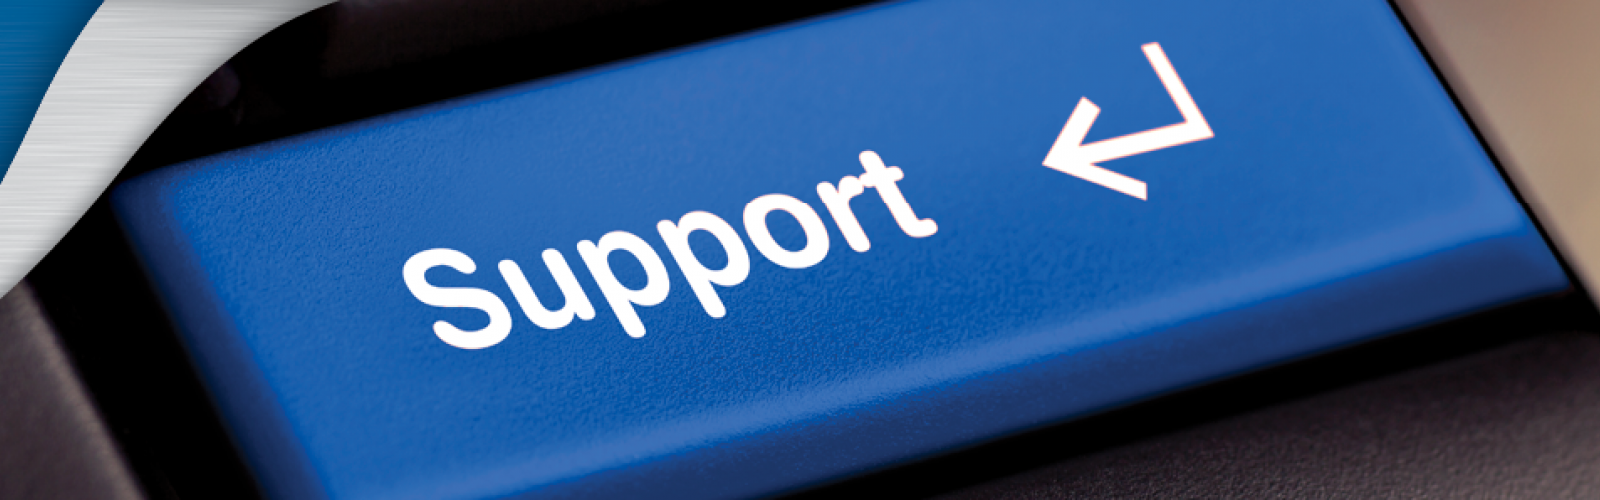 How to Find the Right IT Support for Your Business